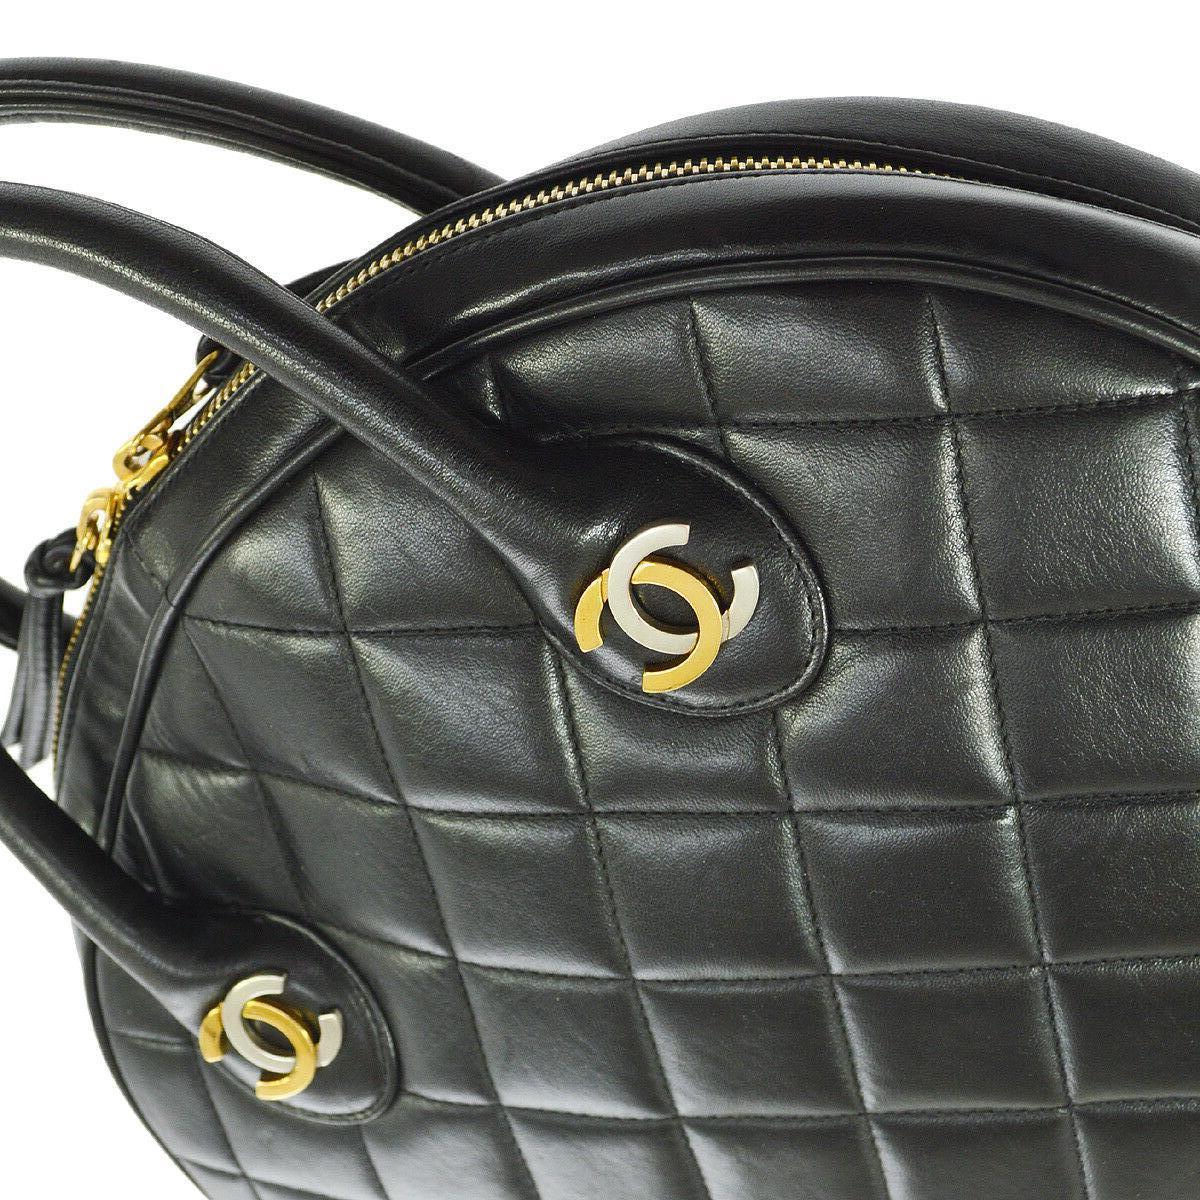 Chanel Rare Black Quilted Leather Gold Silver Top Handle Satchel Bowling Bag

Leather
Gold and silver tone hardware
Zipper closure
Leather lining
Date code present
Made in France
Handle drop 3